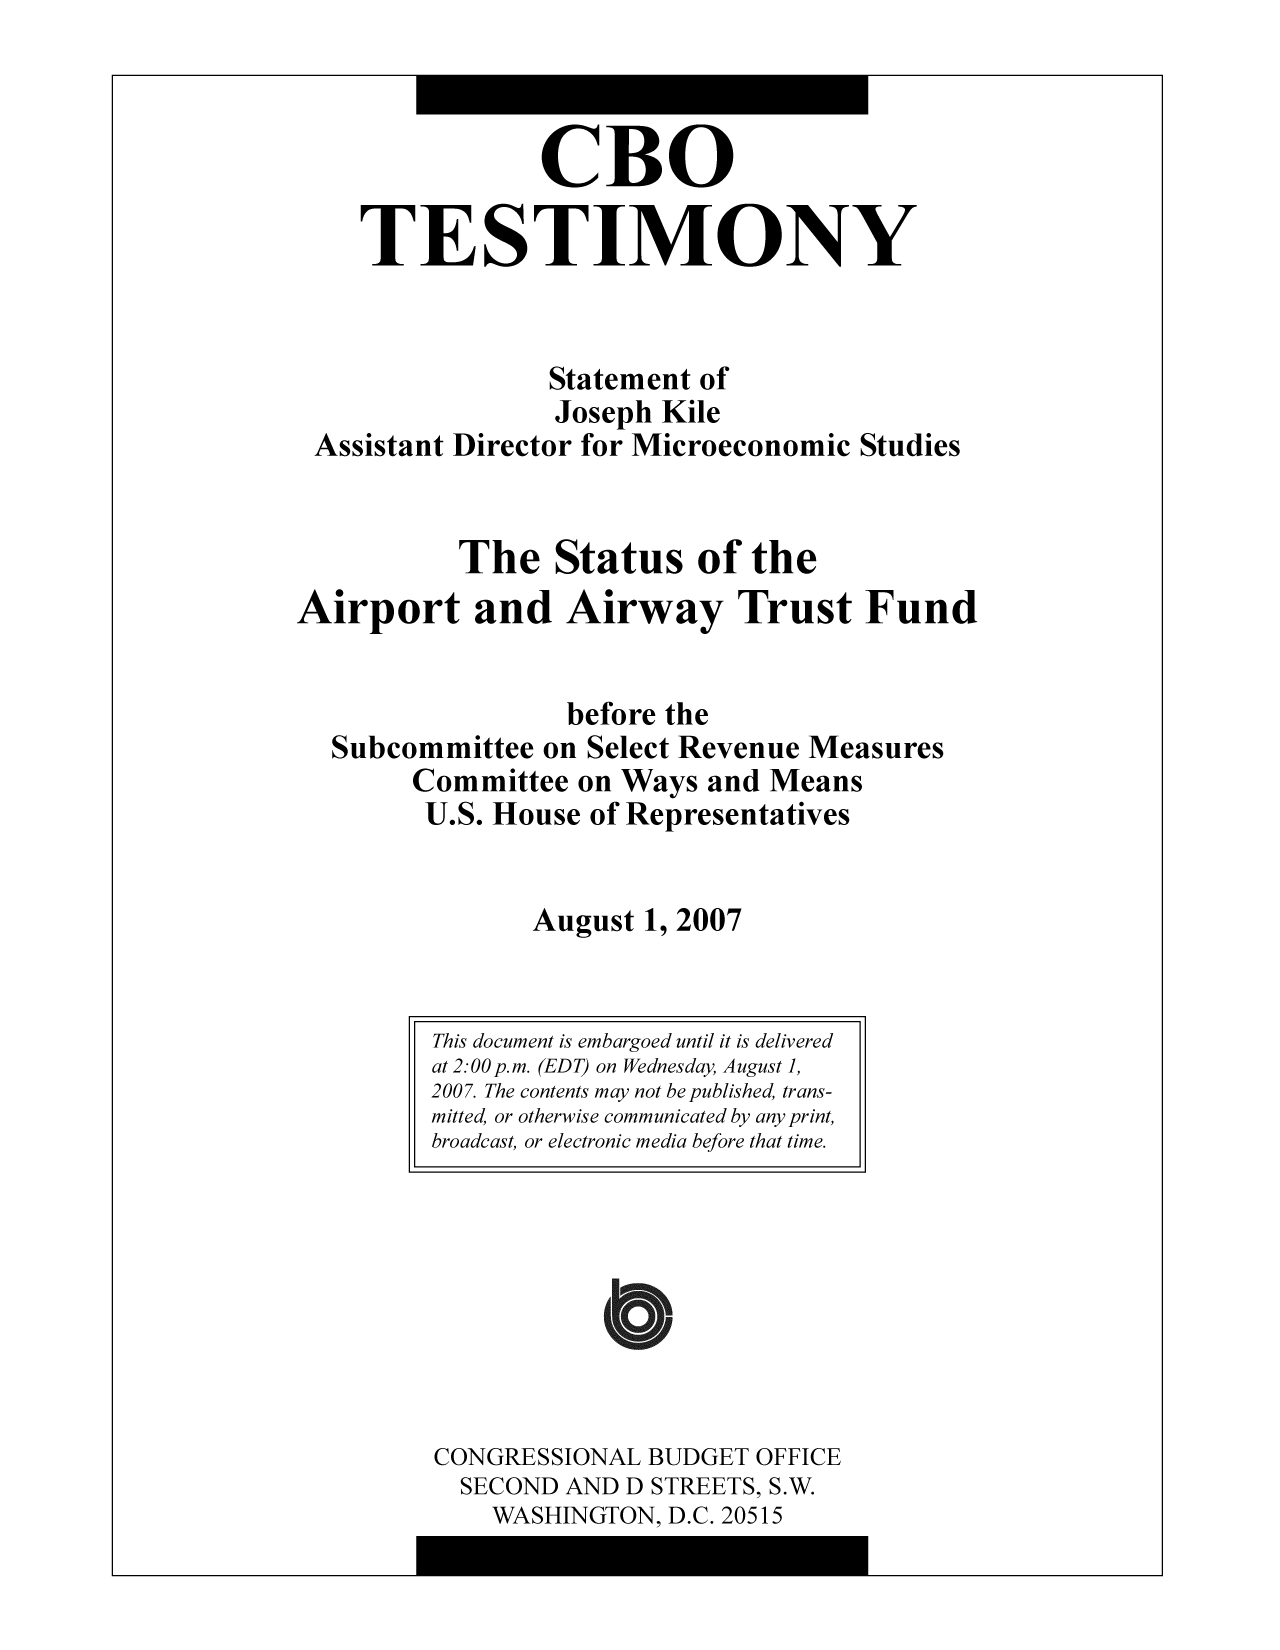 handle is hein.congrec/cbo10334 and id is 1 raw text is: CBO
TESTIMONY
Statement of
Joseph Kile
Assistant Director for Microeconomic Studies
The Status of the
Airport and Airway Trust Fund
before the
Subcommittee on Select Revenue Measures
Committee on Ways and Means
U.S. House of Representatives
August 1, 2007

CONGRESSIONAL BUDGET OFFICE
SECOND AND D STREETS, S.W.
WASHINGTON, D.C. 20515

This document is embargoed until it is delivered
at 2:00 p.m. (EDT) on Wednesday, August 1,
2007. The contents may not be published, trans-
mitted, or otherwise communicated by any print,
broadcast, or electronic media before that time.


